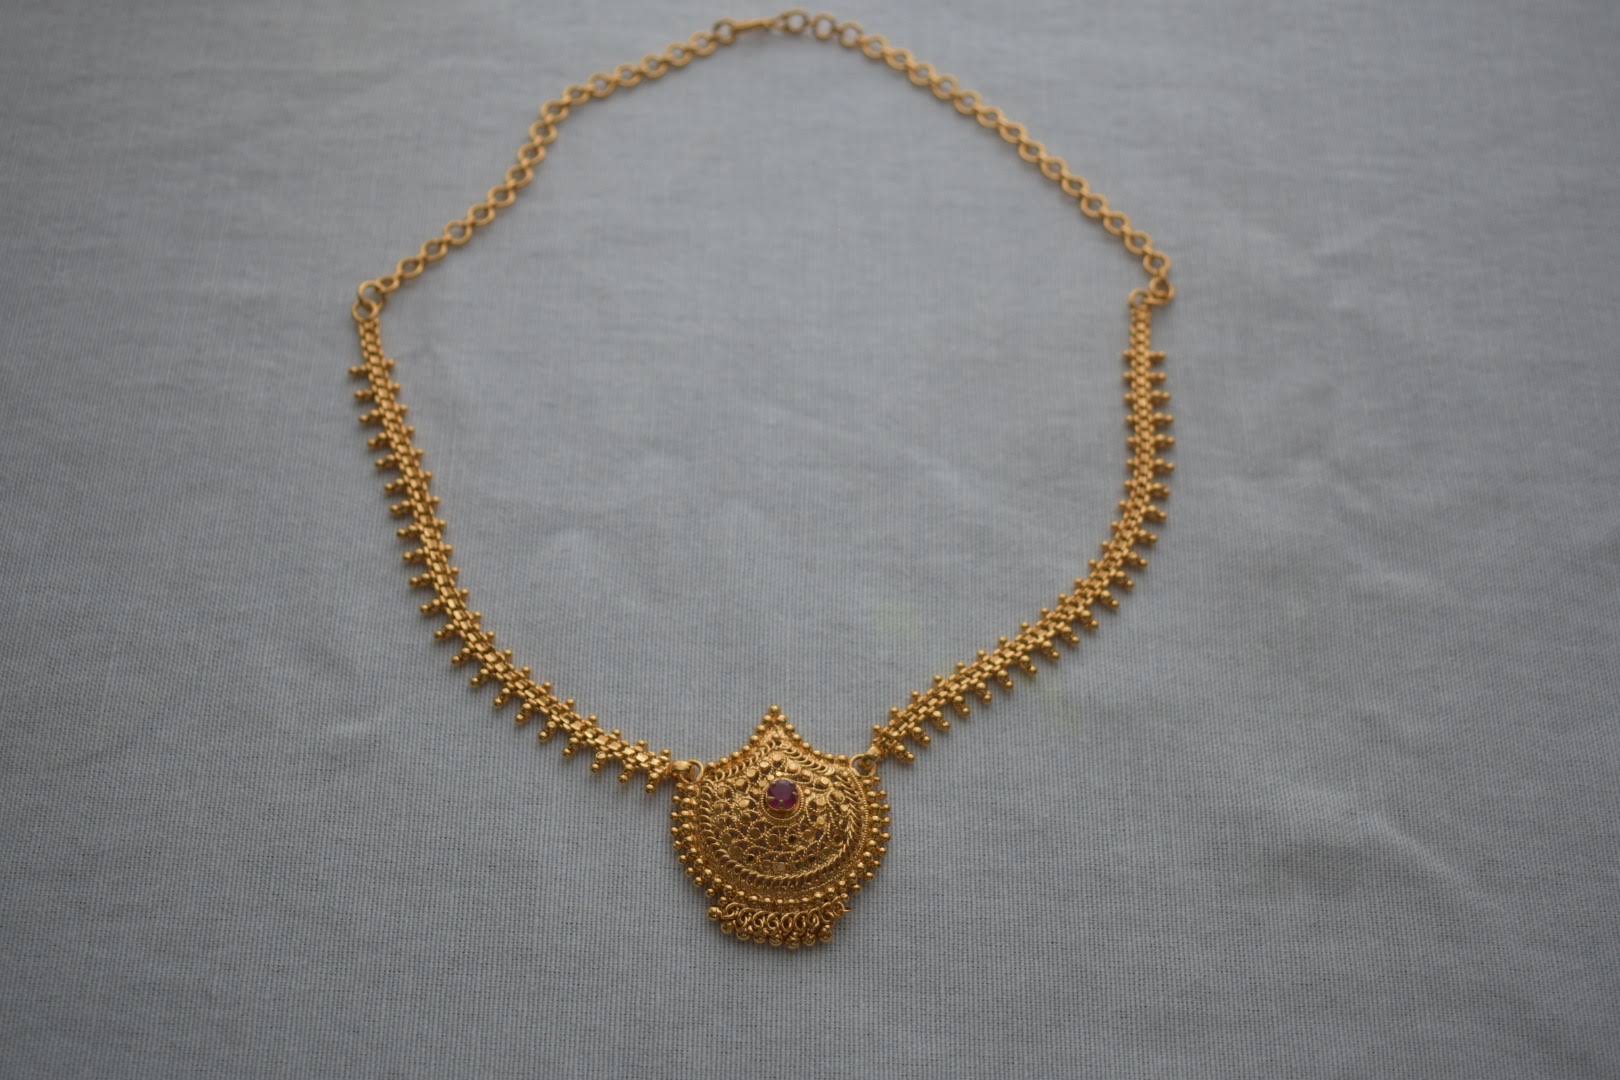 Gold Plated - Temple Jewelry - Short Necklace Set - Gold Plated Beads